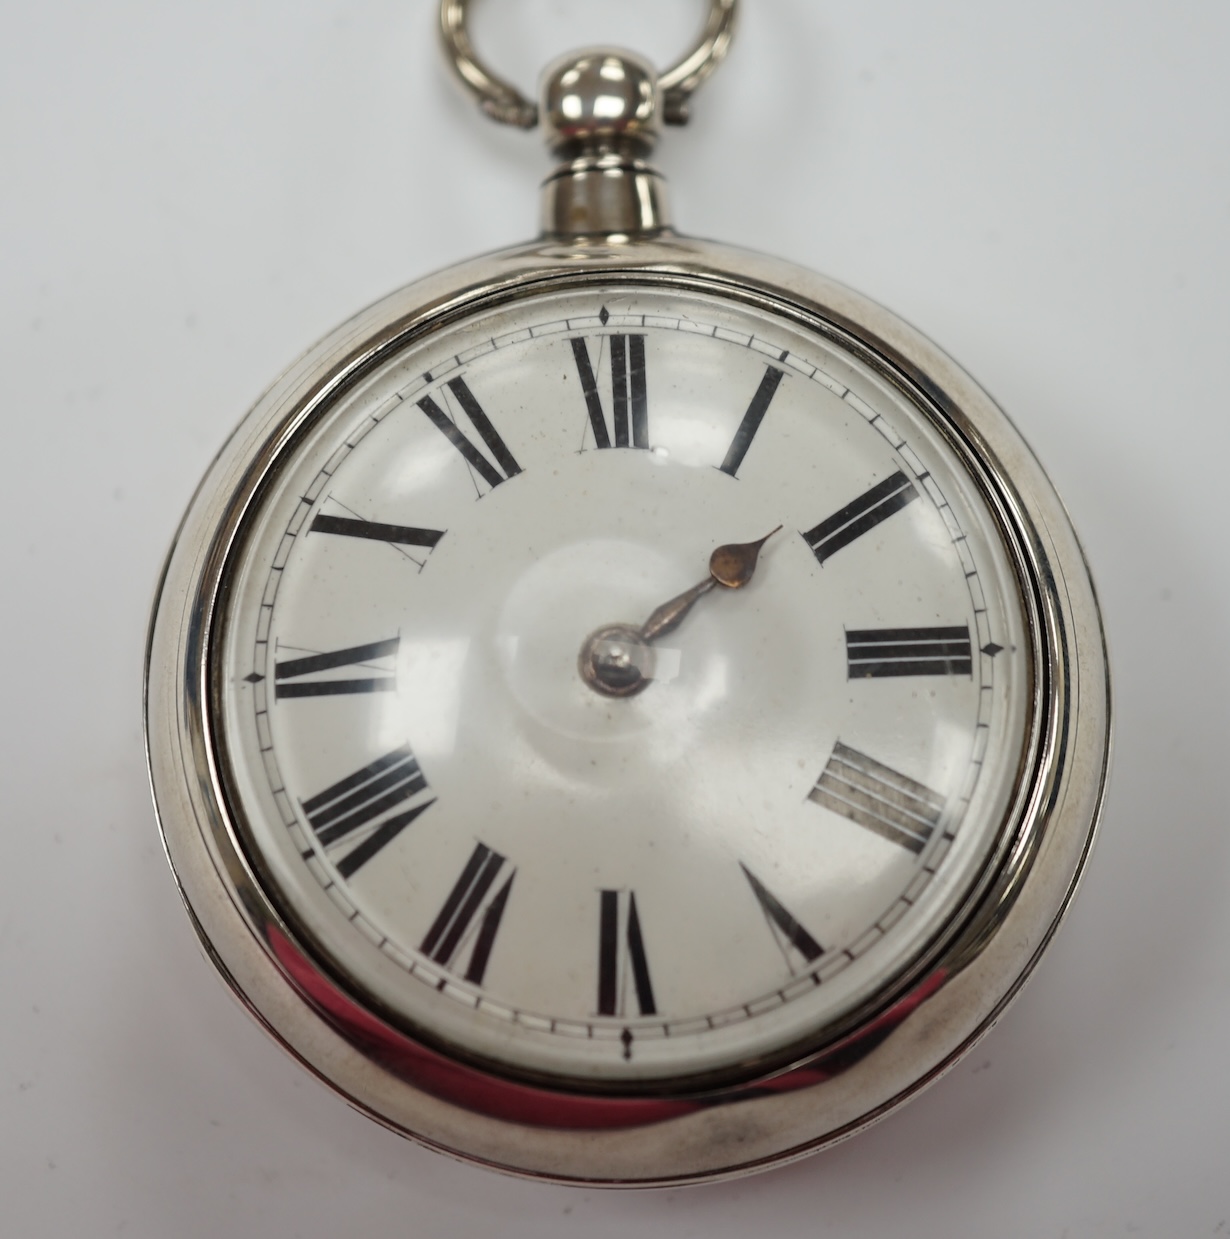 A Victorian silver pair case key wind verge pocket watch, by H. Foster of Ashford, with Roman dial, outer case diameter 58mm. Fair condition (lacking minute hand).